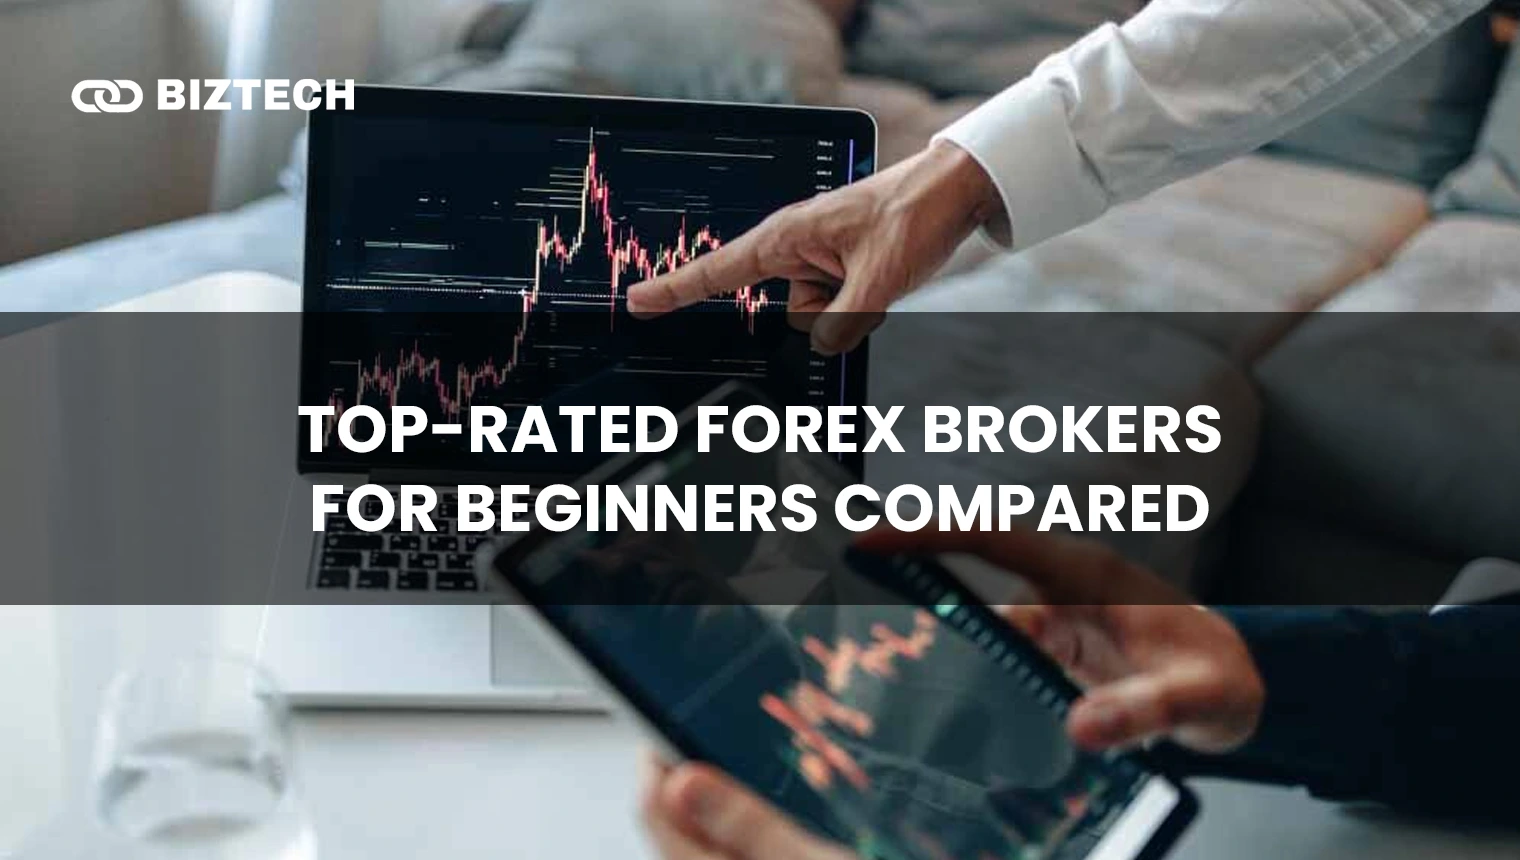 Top-Rated Forex Brokers for Beginners Compared